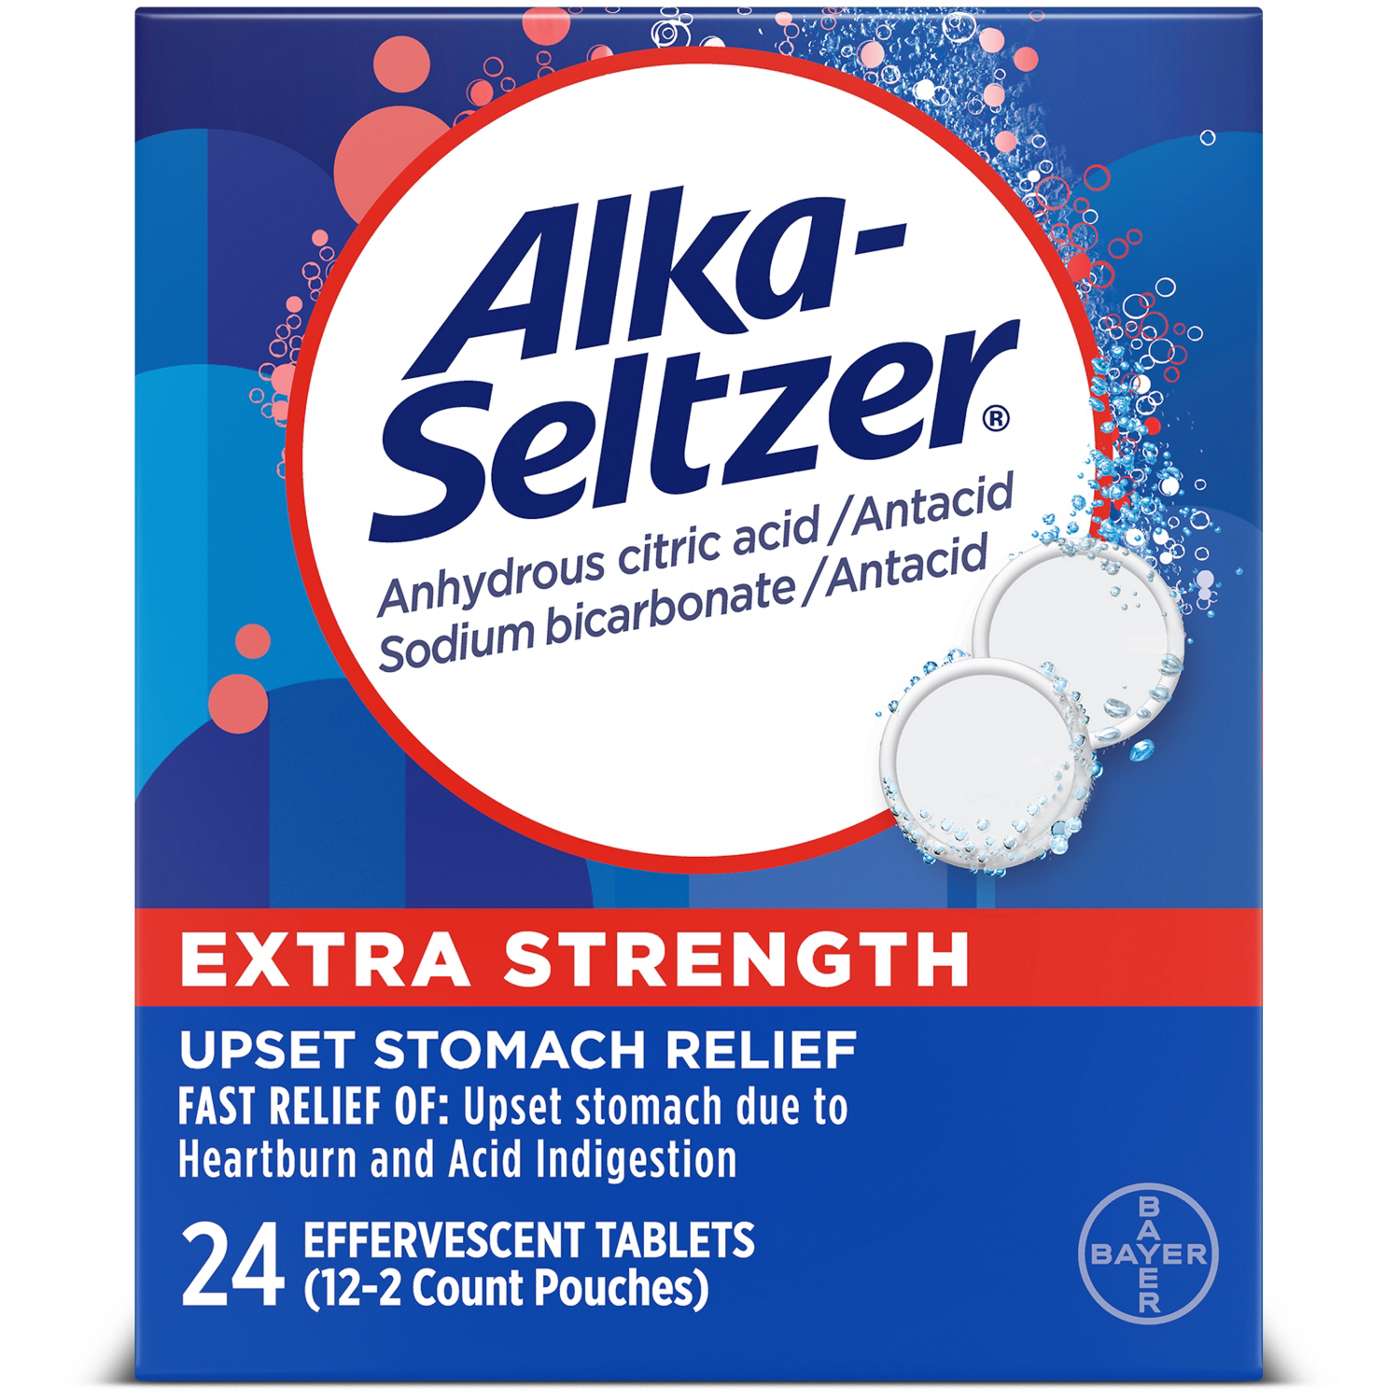 Alka-Seltzer Extra Strength Tablets; image 1 of 9